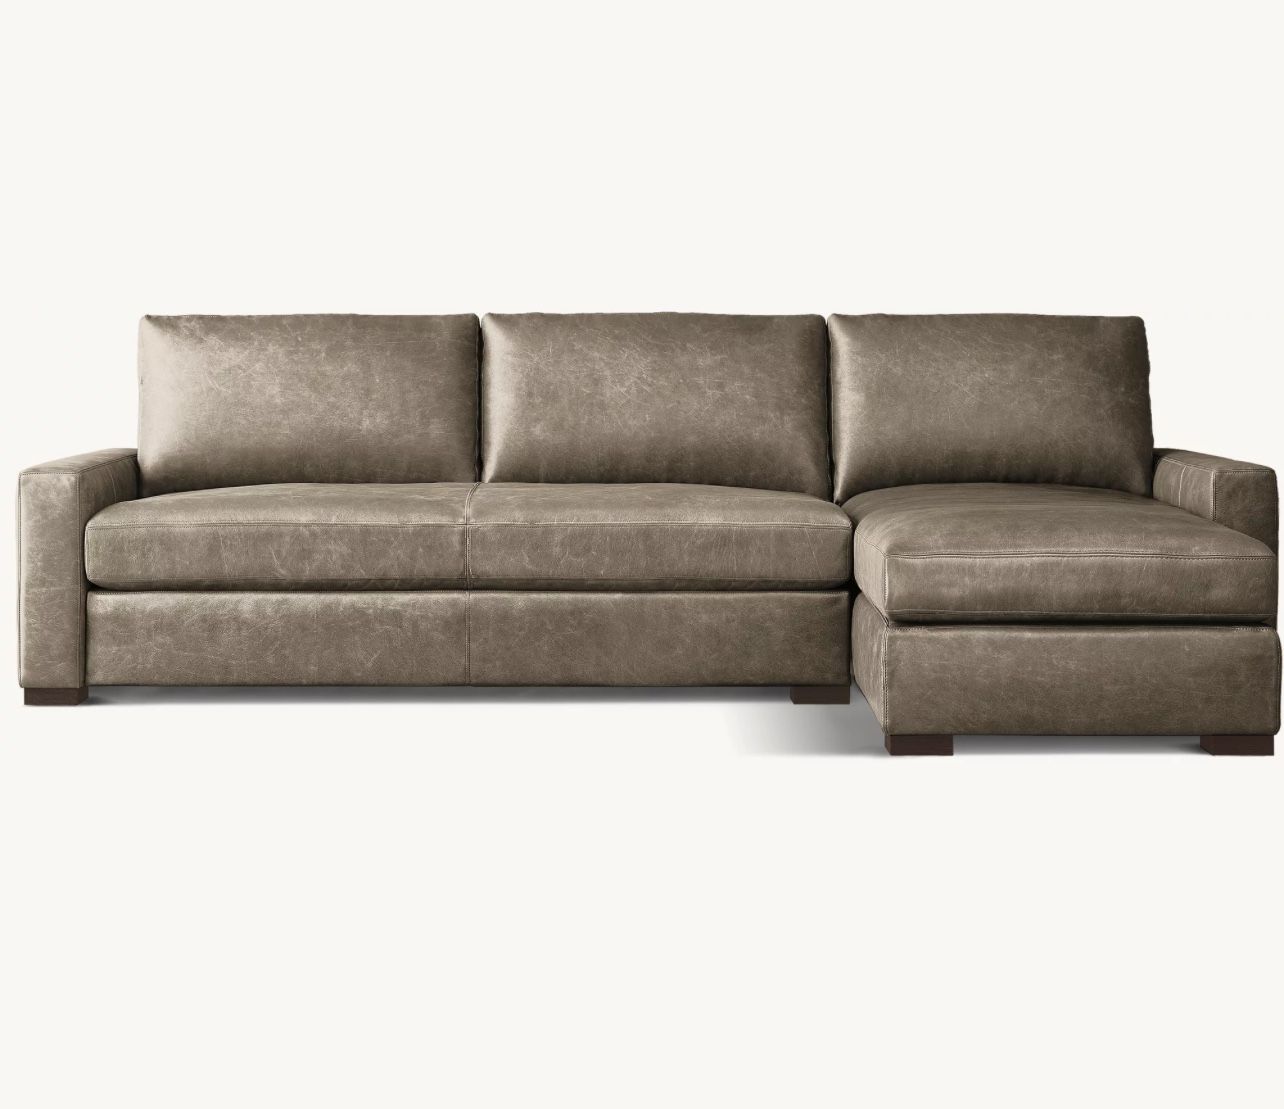 Restoration Hardware Maxwell premium leather sleeper right arm sofa chair sectional with queen bed